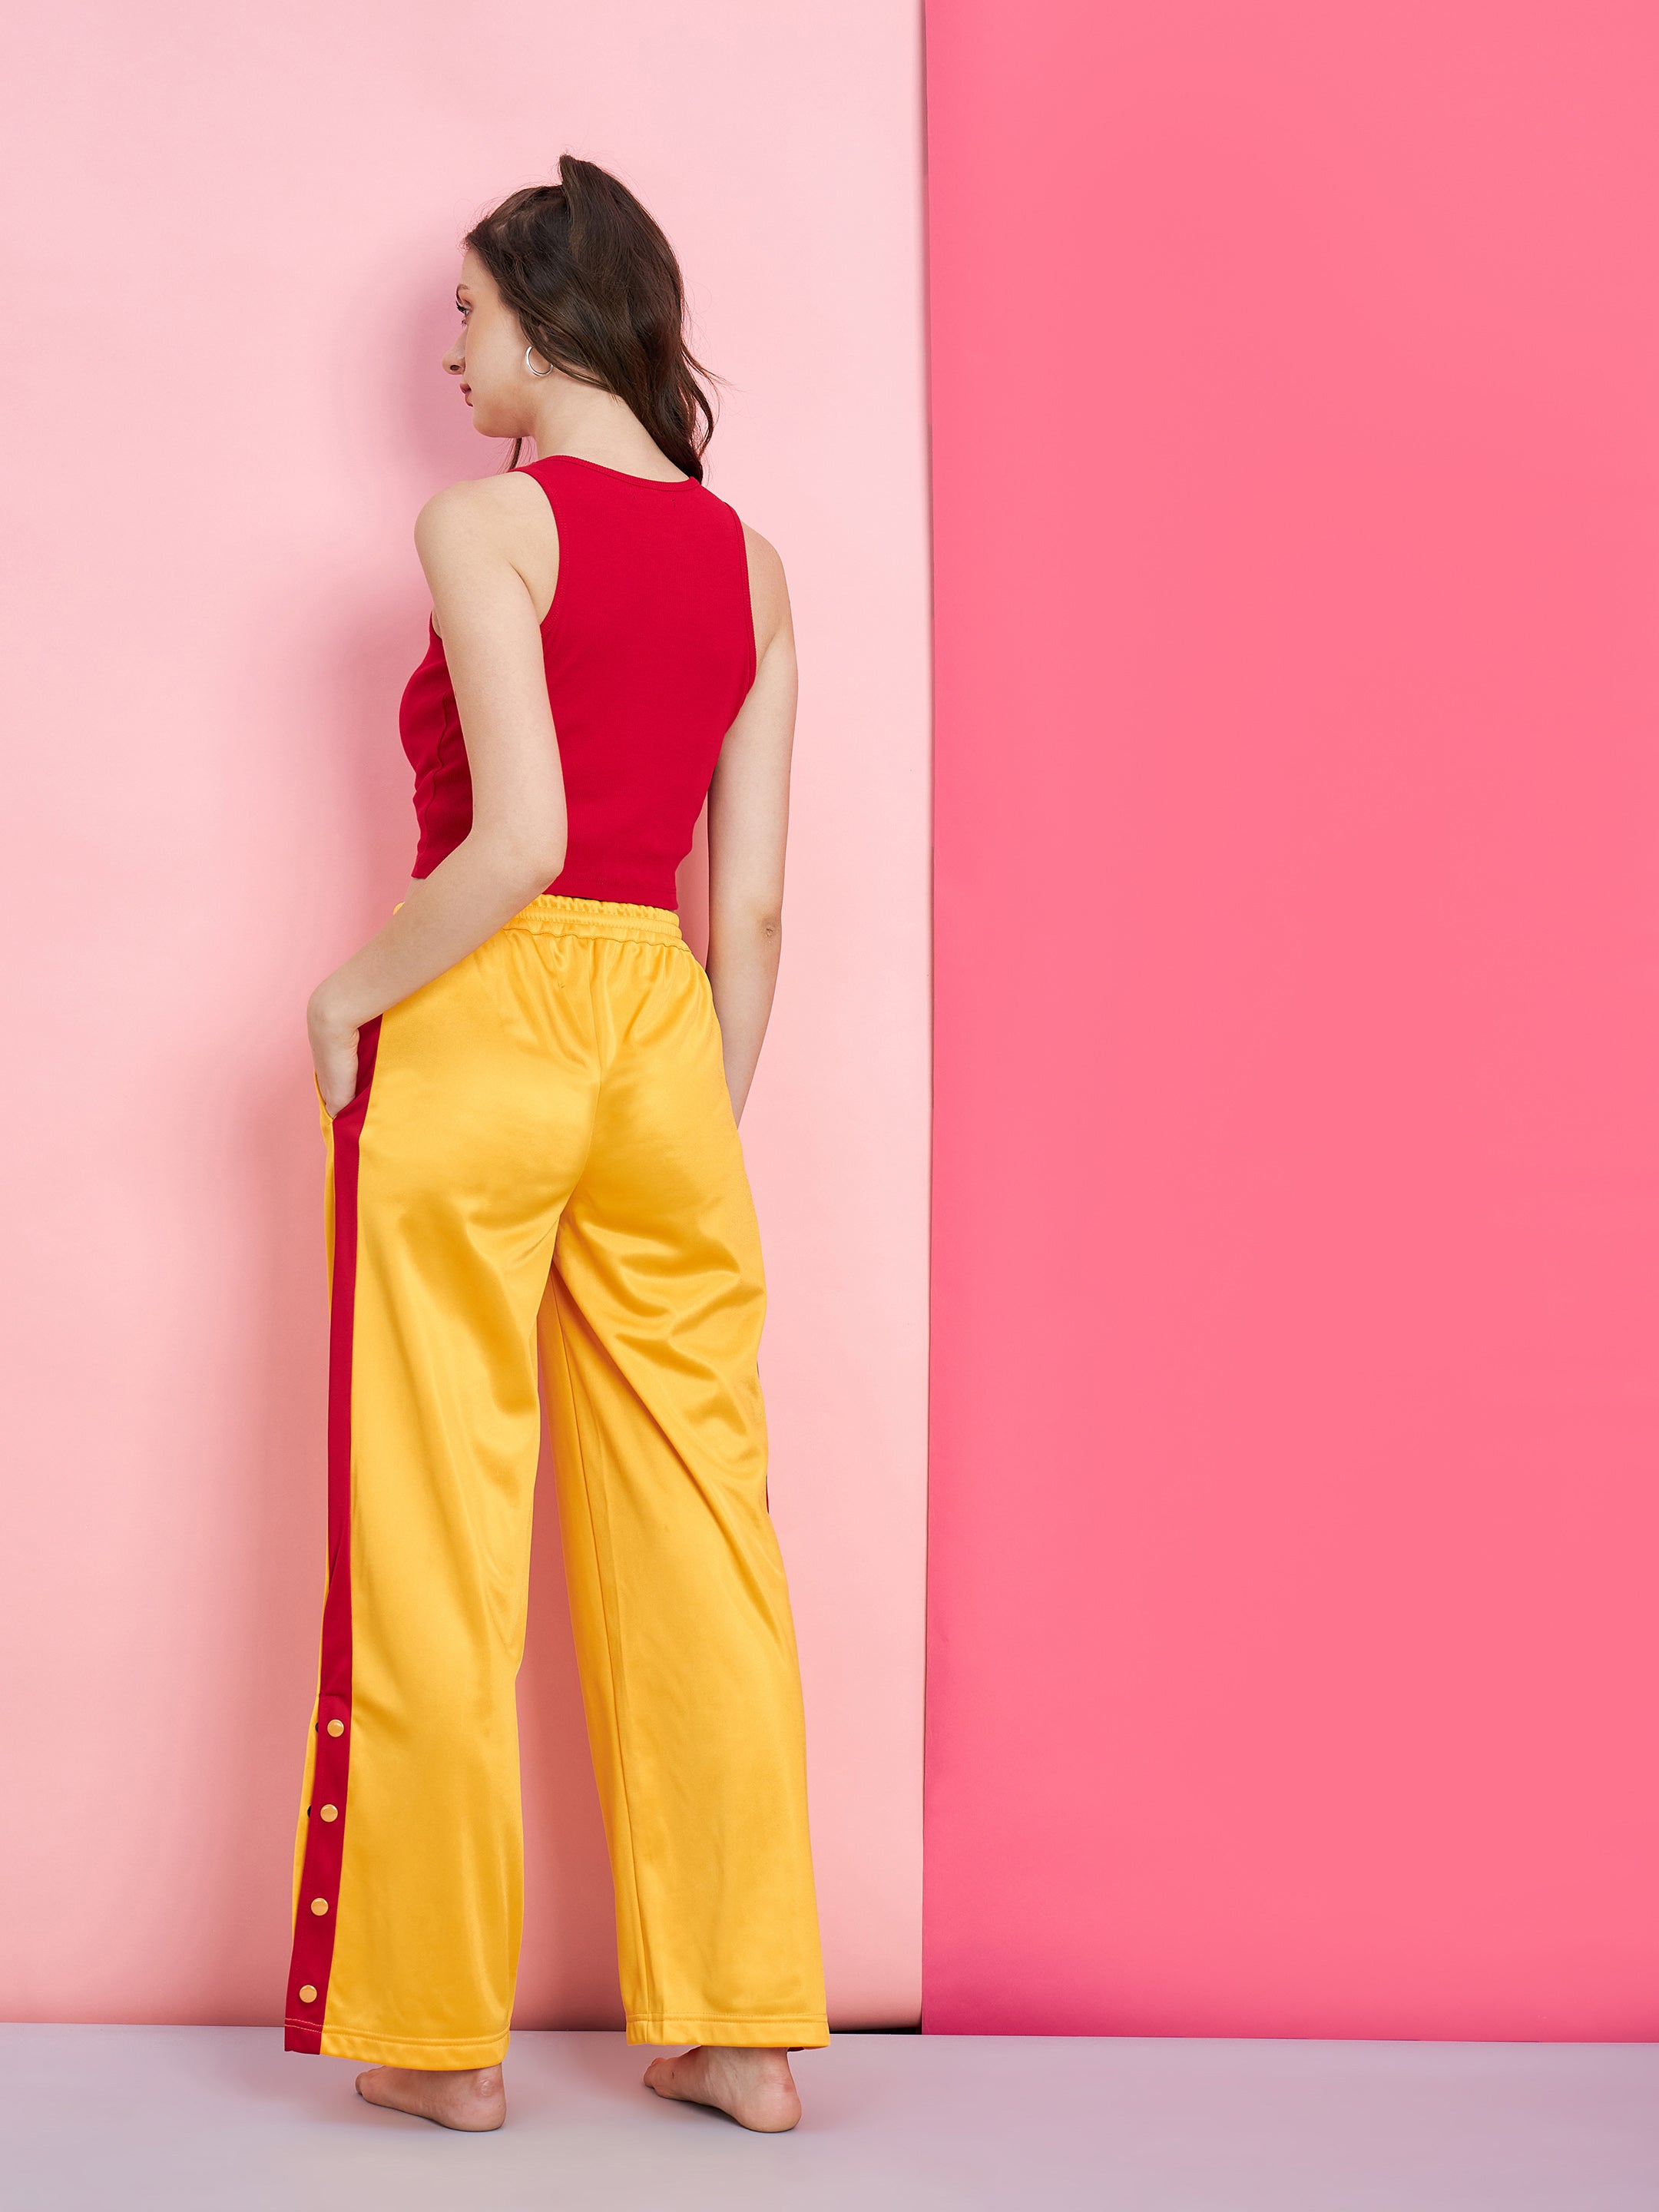 Women's Red Rib Crop Top With Yellow Side Button Track Pants - SASSAFRAS